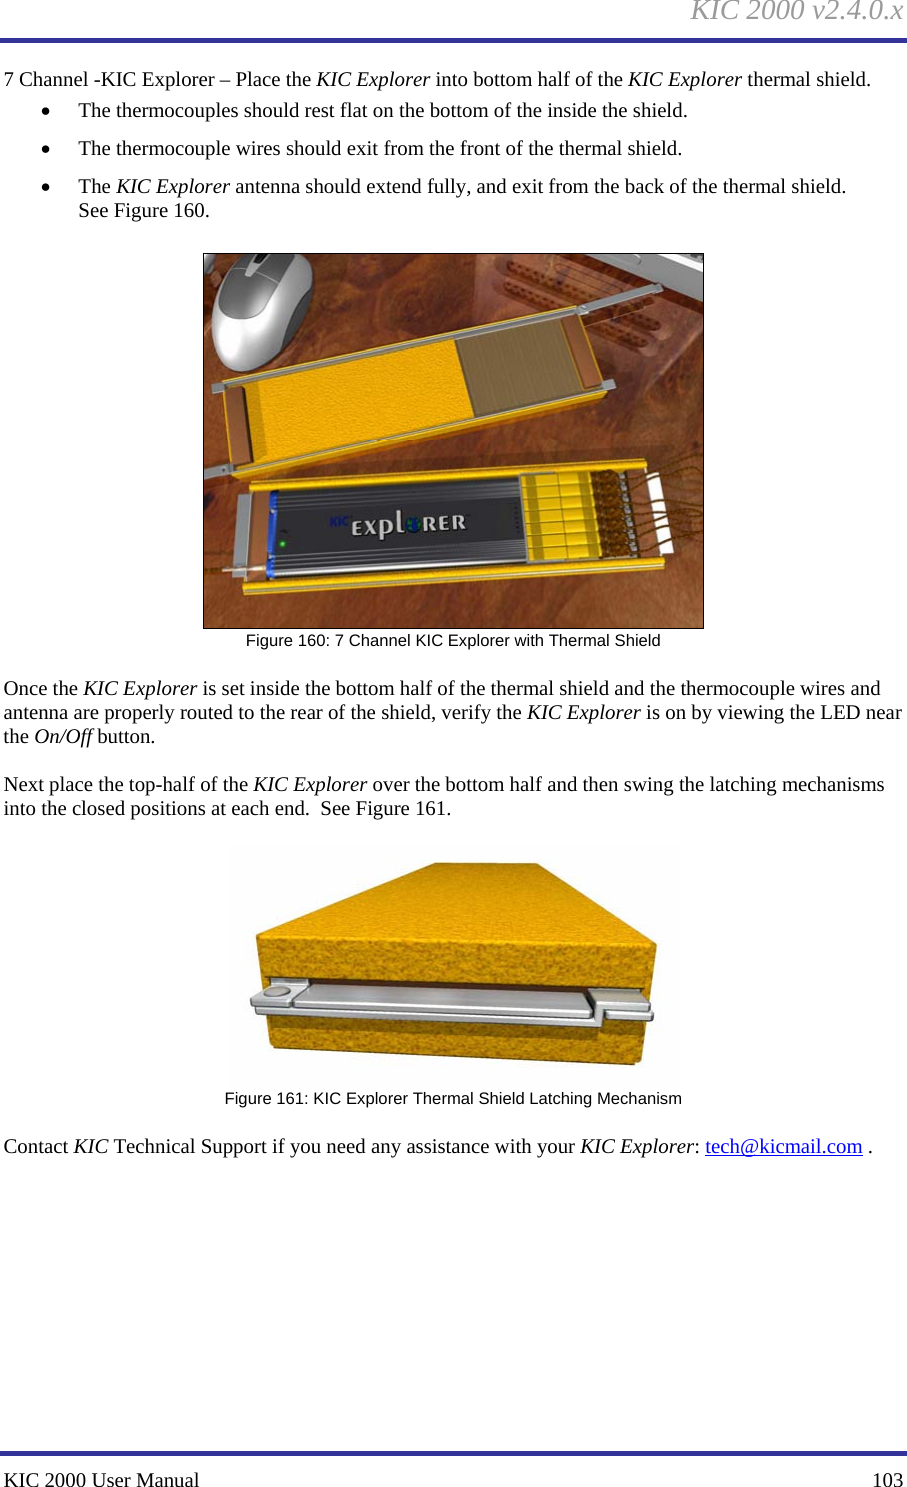 KIC 2000 v2.4.0.x KIC 2000 User Manual    103 7 Channel -KIC Explorer – Place the KIC Explorer into bottom half of the KIC Explorer thermal shield.   • The thermocouples should rest flat on the bottom of the inside the shield.   • The thermocouple wires should exit from the front of the thermal shield.   • The KIC Explorer antenna should extend fully, and exit from the back of the thermal shield. See Figure 160.     Figure 160: 7 Channel KIC Explorer with Thermal Shield  Once the KIC Explorer is set inside the bottom half of the thermal shield and the thermocouple wires and antenna are properly routed to the rear of the shield, verify the KIC Explorer is on by viewing the LED near the On/Off button.    Next place the top-half of the KIC Explorer over the bottom half and then swing the latching mechanisms into the closed positions at each end.  See Figure 161.     Figure 161: KIC Explorer Thermal Shield Latching Mechanism  Contact KIC Technical Support if you need any assistance with your KIC Explorer: tech@kicmail.com .    